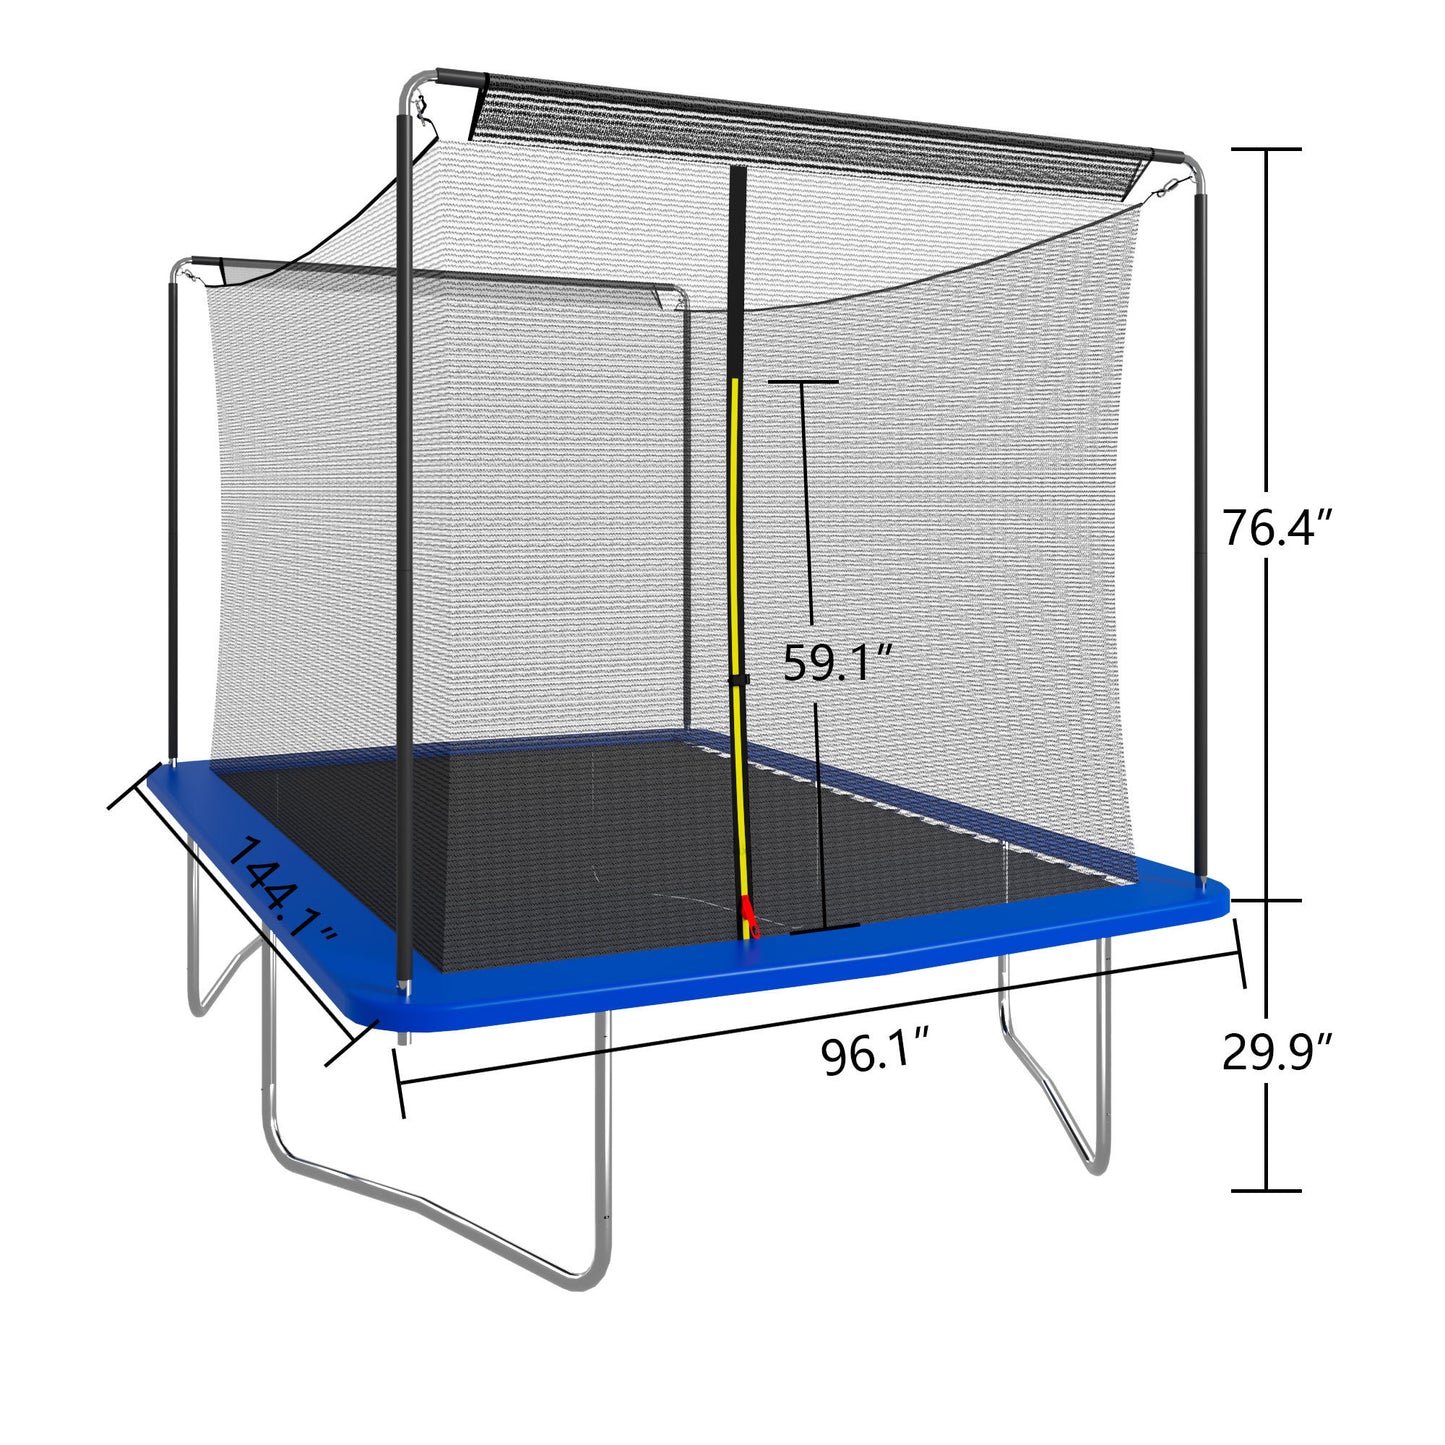 8ft by 12ft rectangular trampoline blue ASTM standard tested and CPC certified